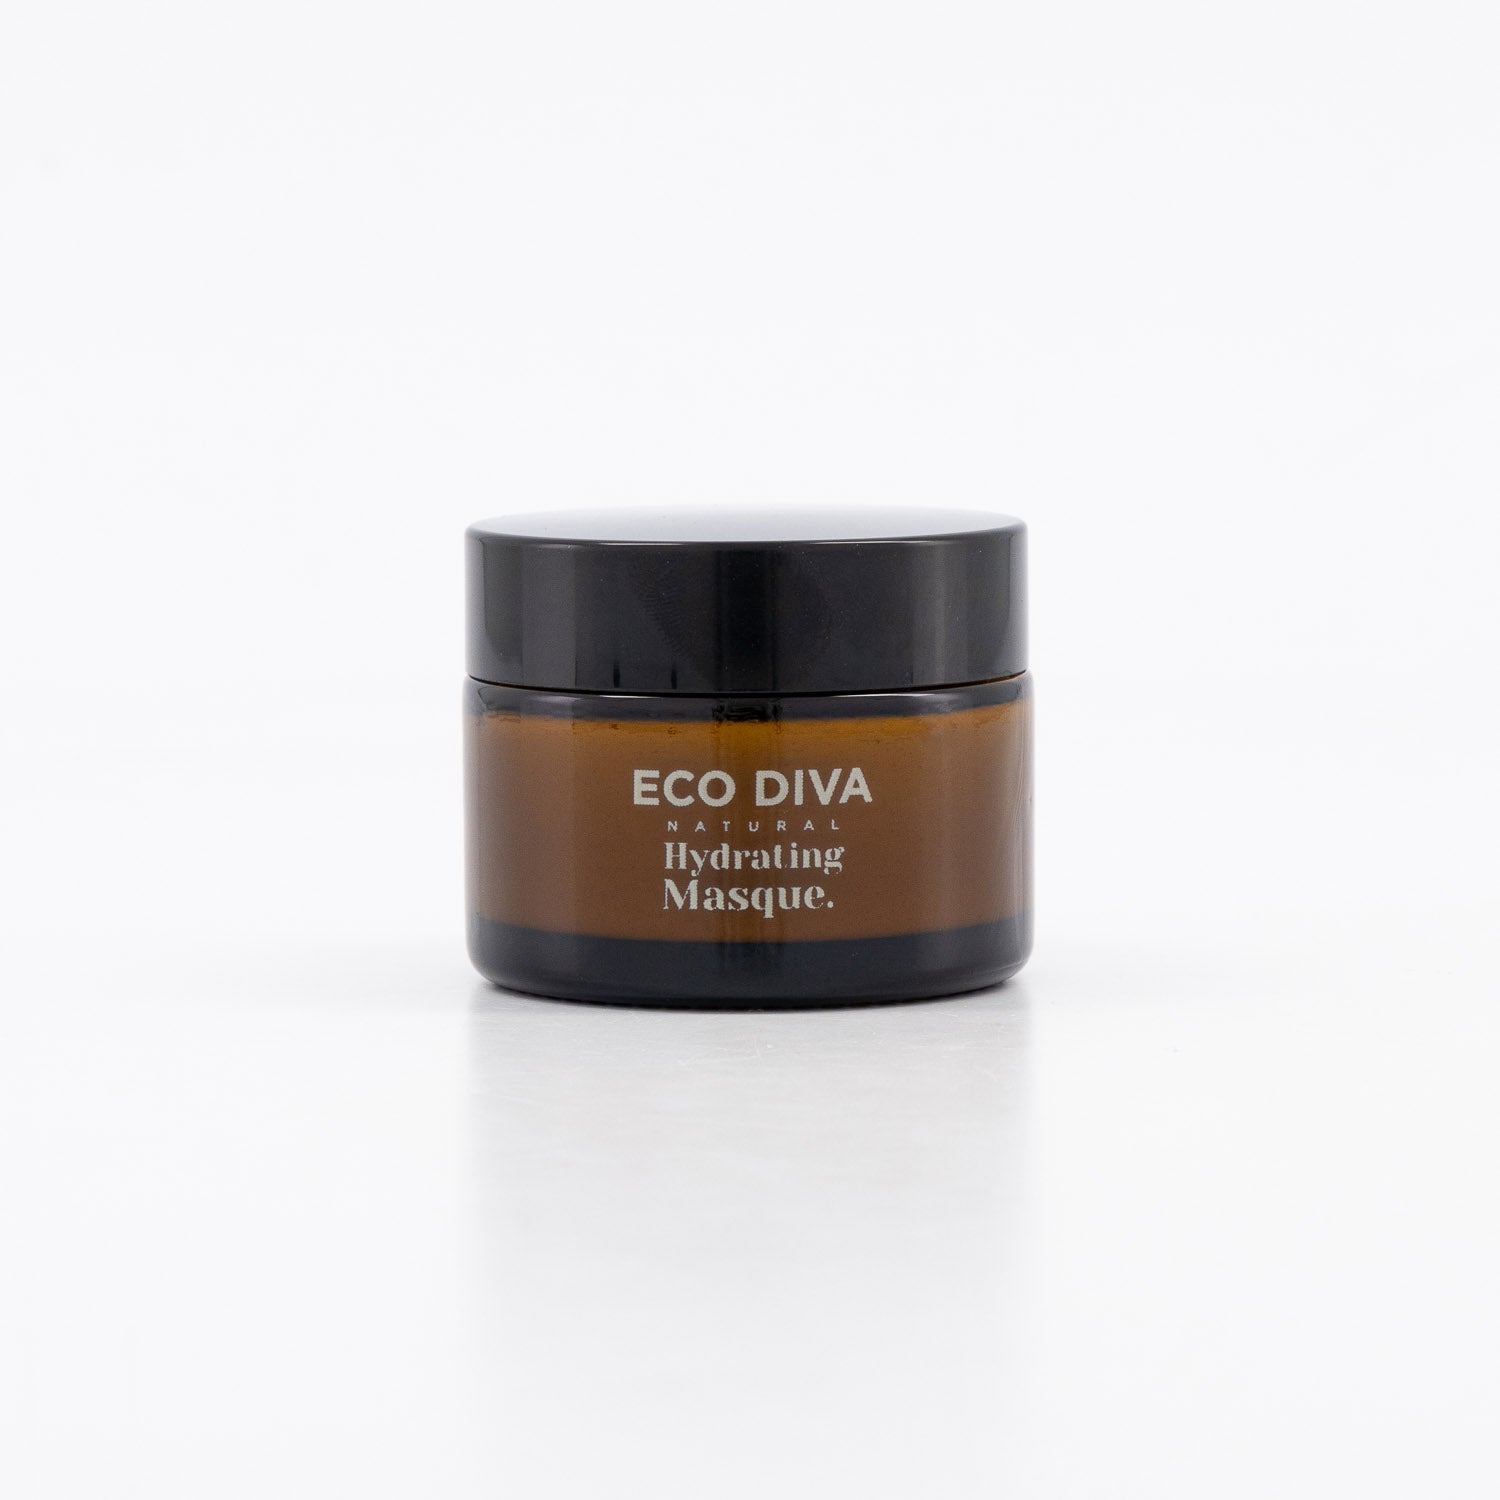 Eco Diva The Hydrating Masque